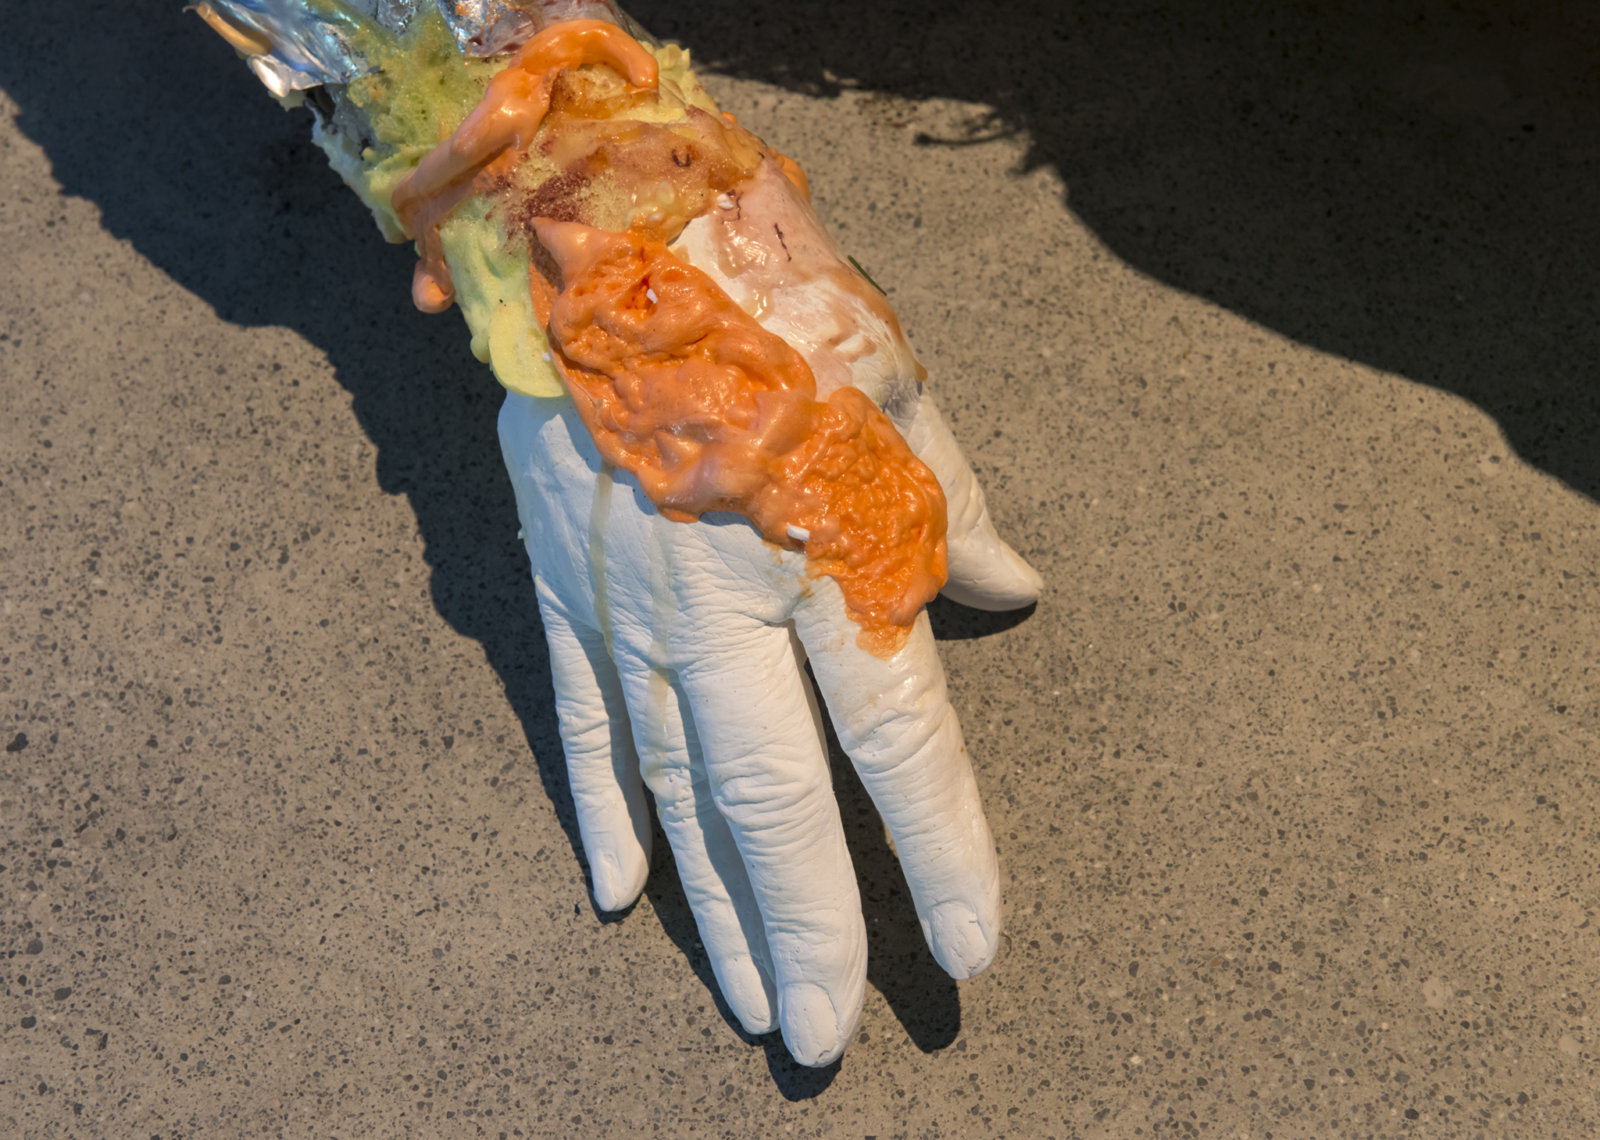 Kasper Feyrer, Corpse, Maiden (detail), 2018, insulation foam, whistle, glass marbles, mineral rocks, broken rulers, coins, lenses, blackberry, mugwort, rope, hinges, gummy worms, plaster cast hands and feet, soil, aluminum armature, latex, pigment, paper, cast iron, miscellaneous materials, 71 x 28 x 13 in. (180 x 71 x 33 cm)